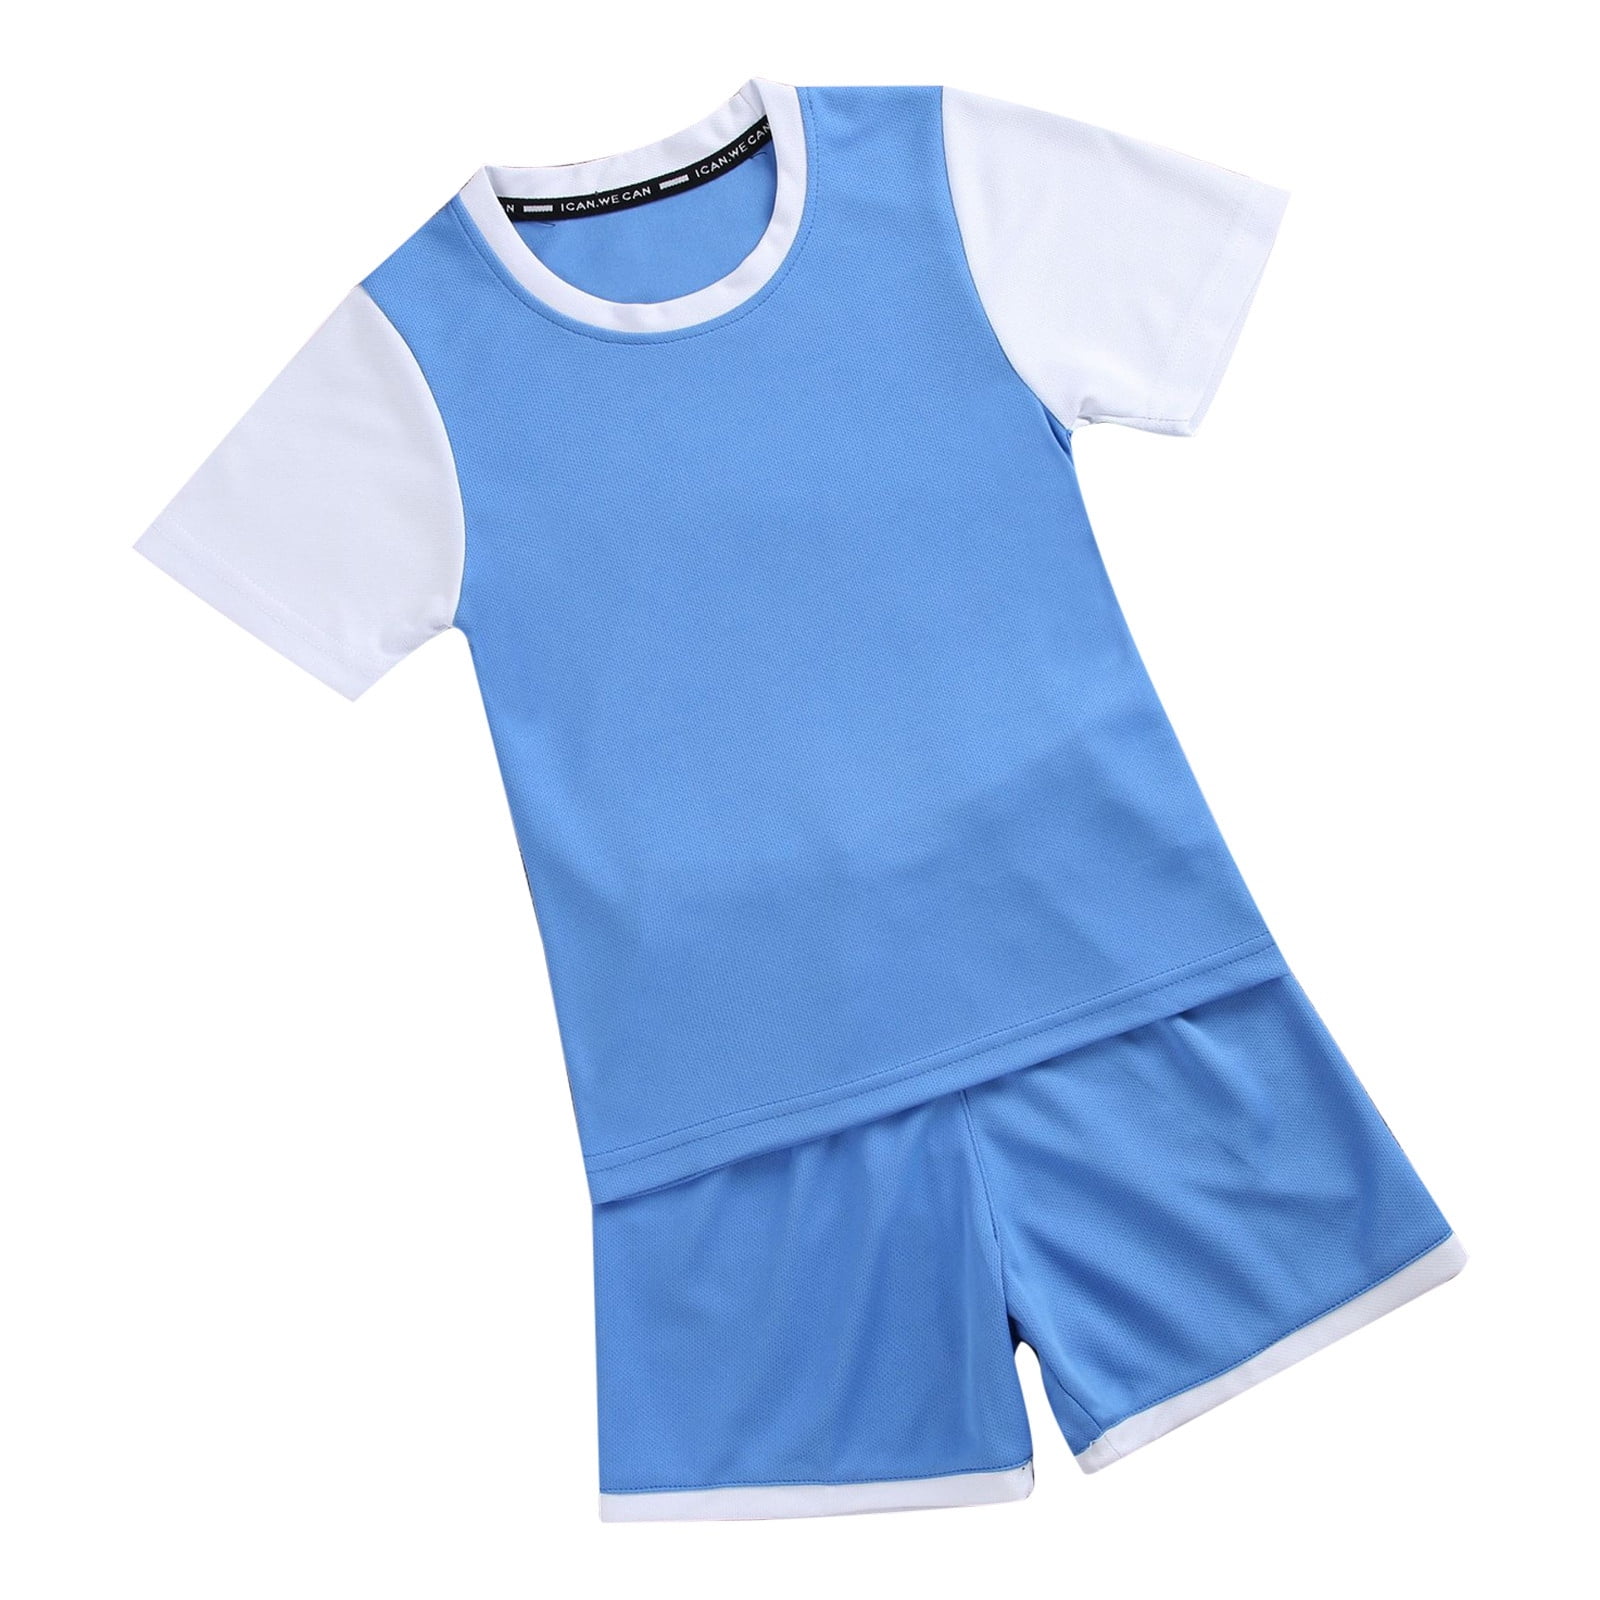 Boys Outfits Set Children's Basketball Clothes Boys' Girls' Primary And ...